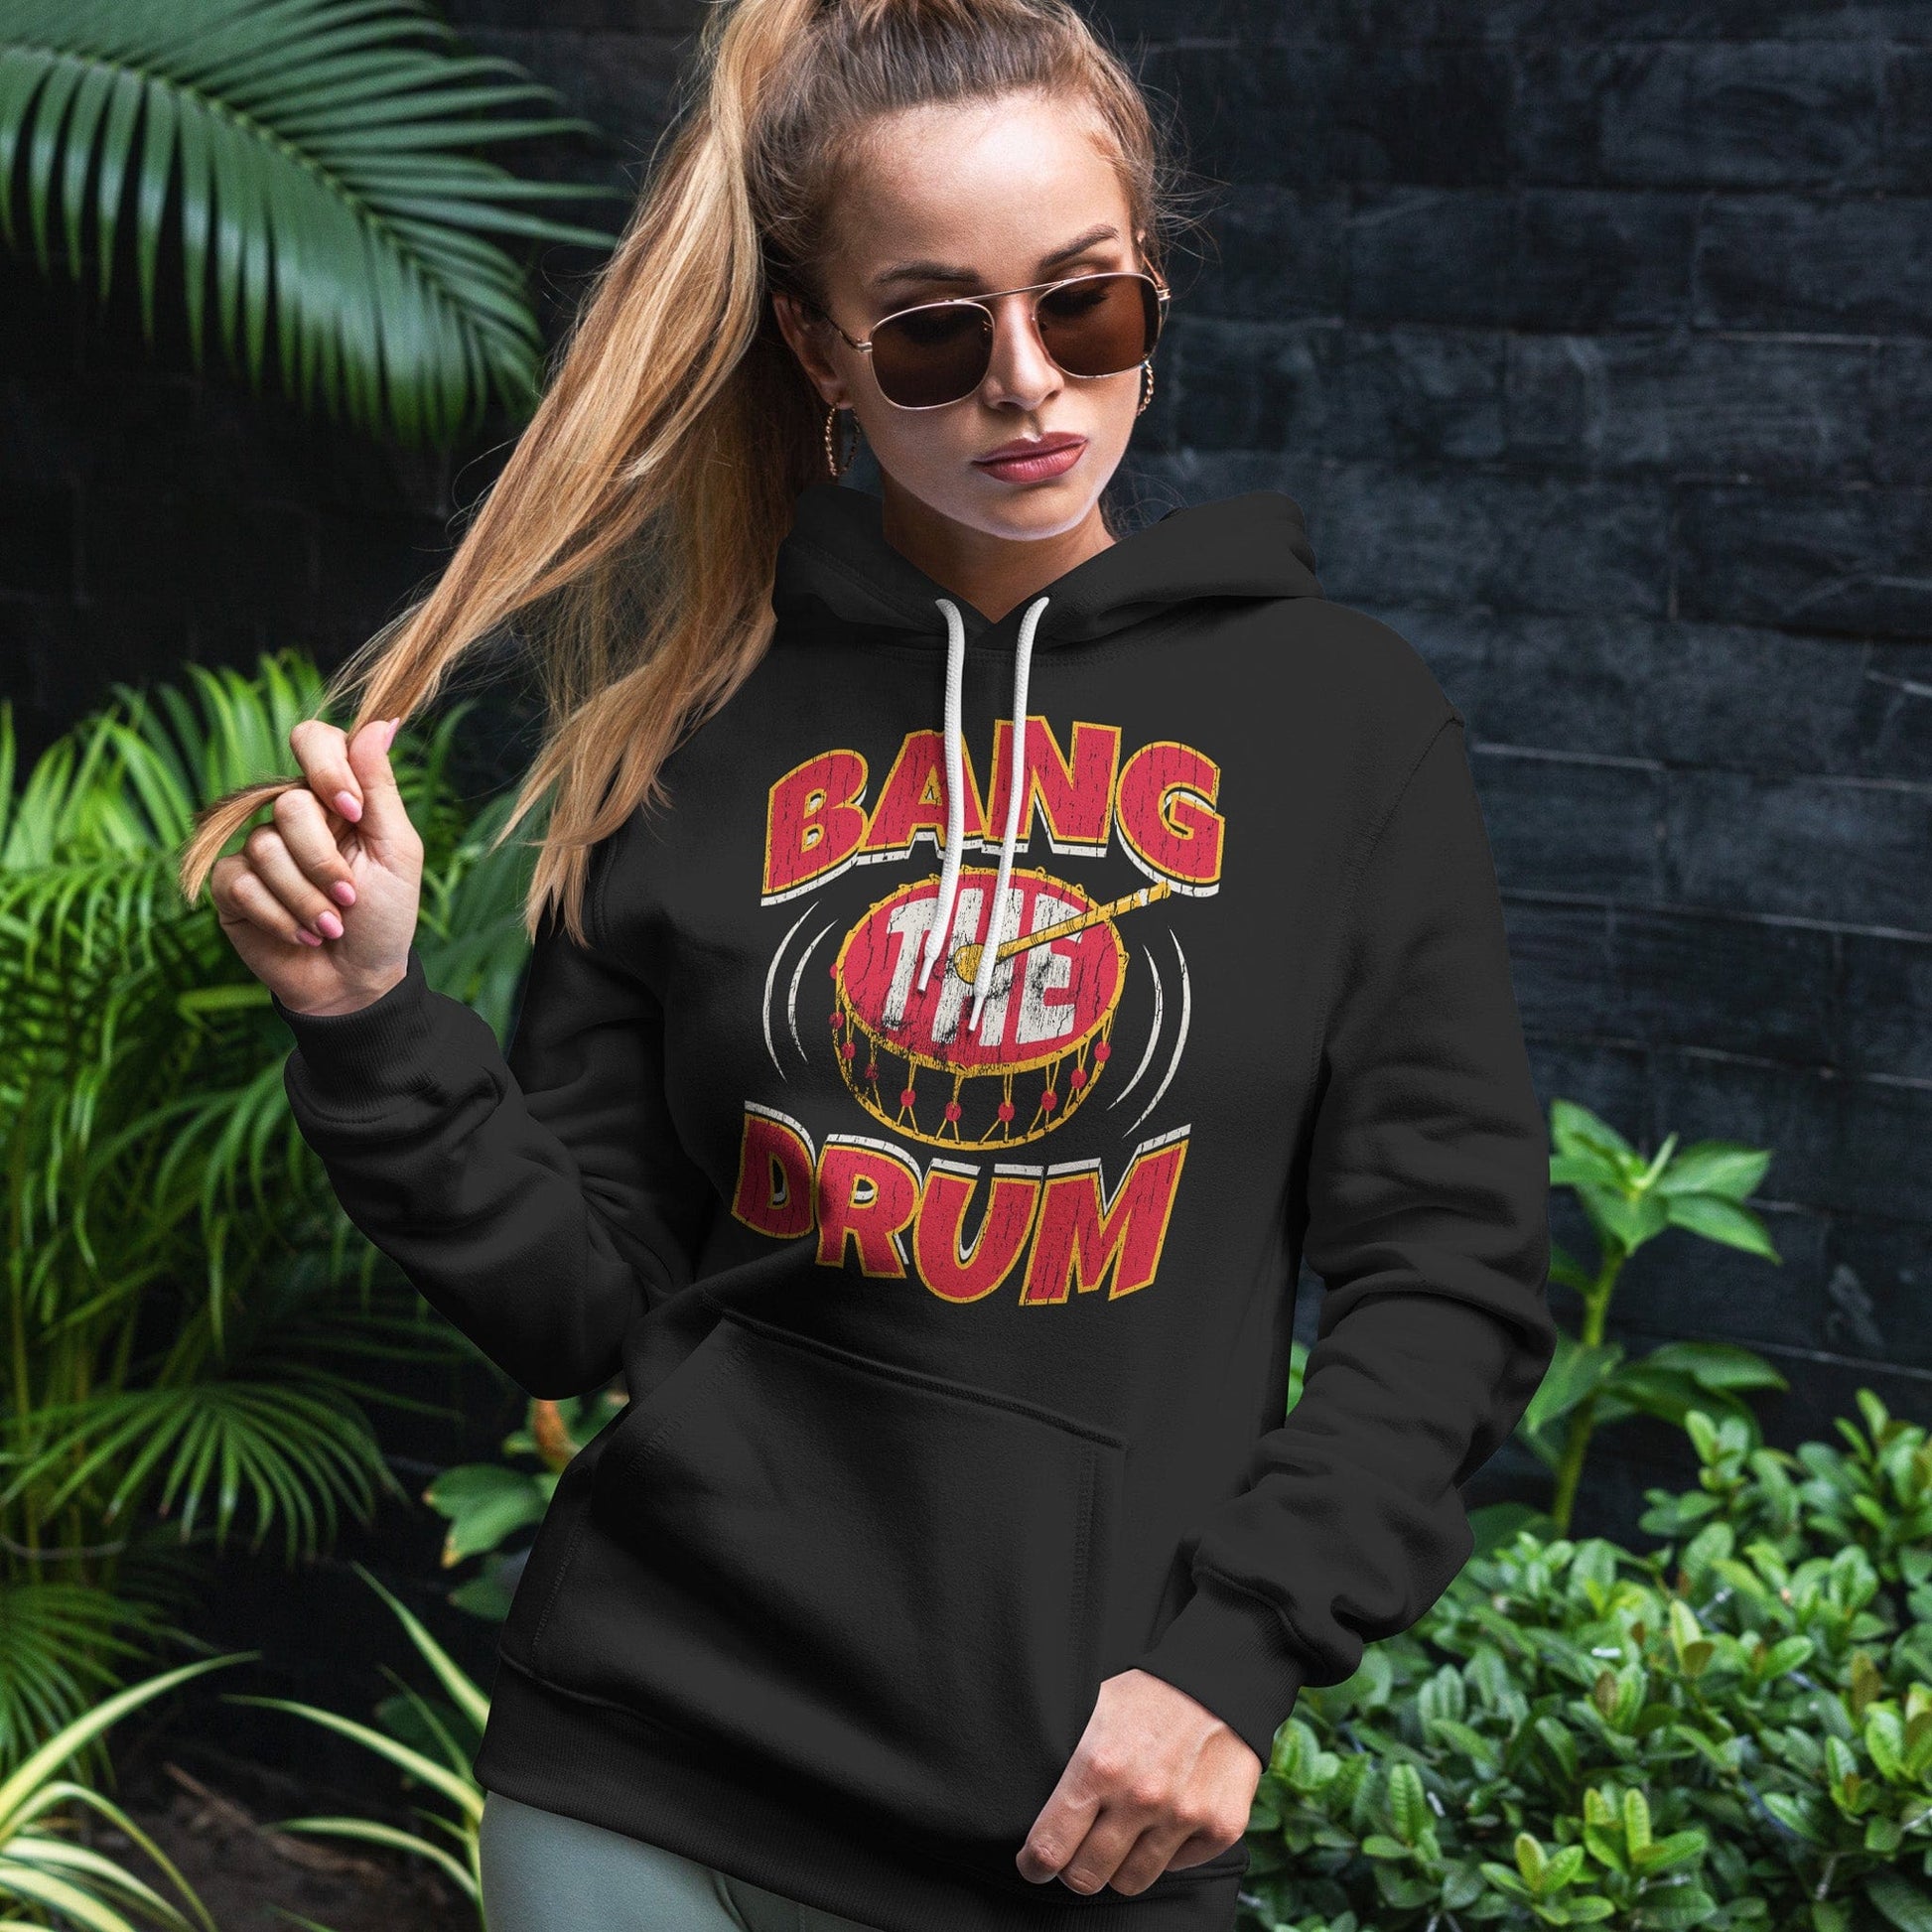 KC Swag | Kansas City Chiefs white/red/gold BAG THE DRUM on black sponge-fleece pullover hoodie worn by female model standing in front of a dark gray wall and green foliage